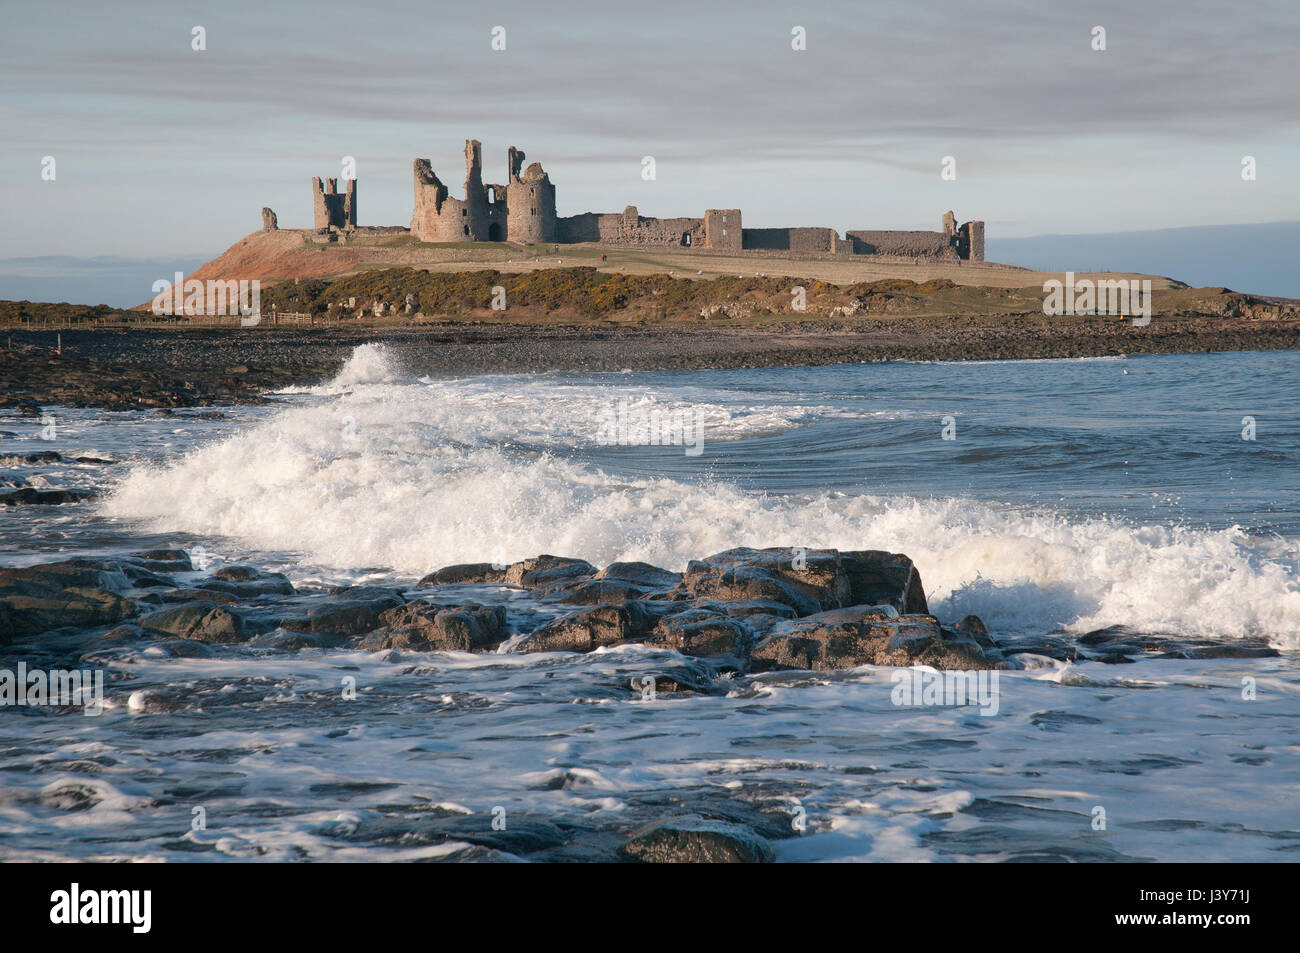 Dunstanburgh Castle on its Whin Sill outcrop, seen from the south. The castle, built in the 14th century, fell into disrepair by the 16th century. Stock Photo